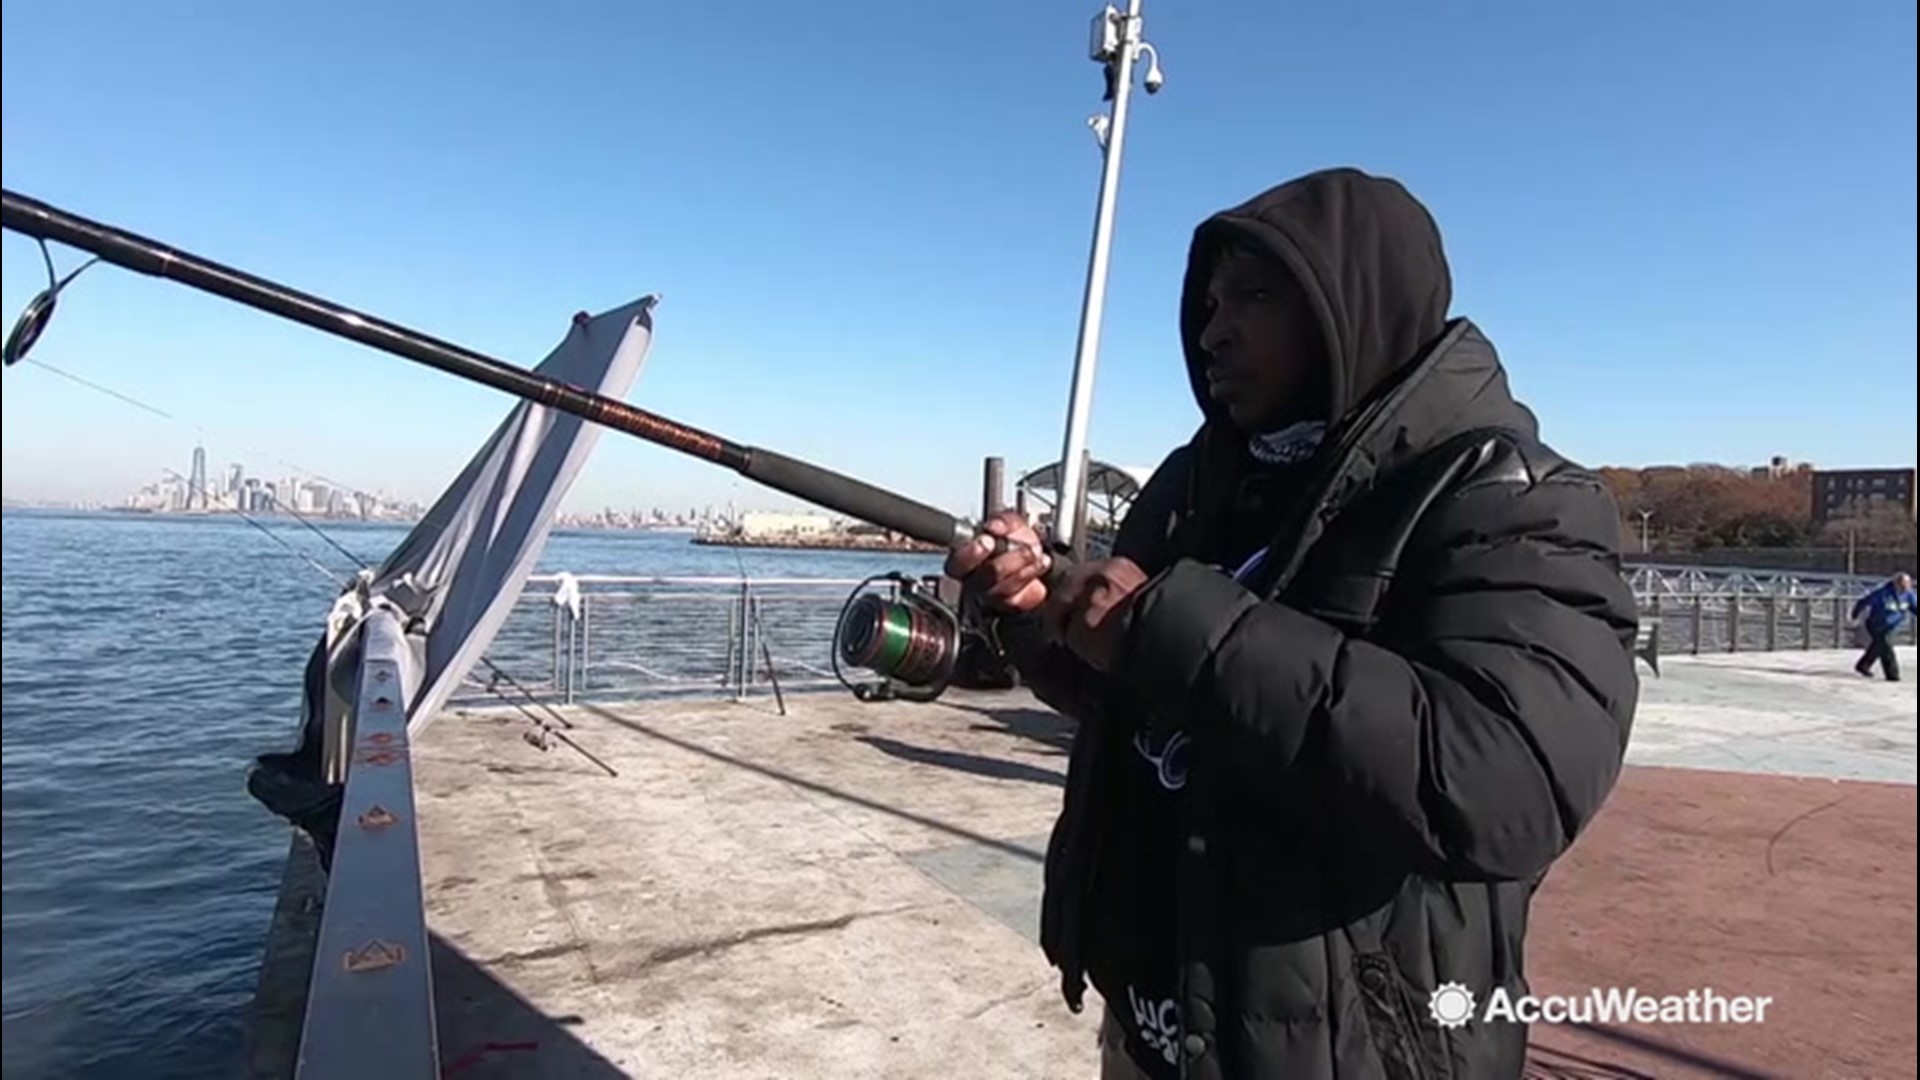 AccuWeather's Dexter Henry caught up with some anglers in New York, New York, on Nov. 20 to see how they adjust to the cold weather at this time of year.